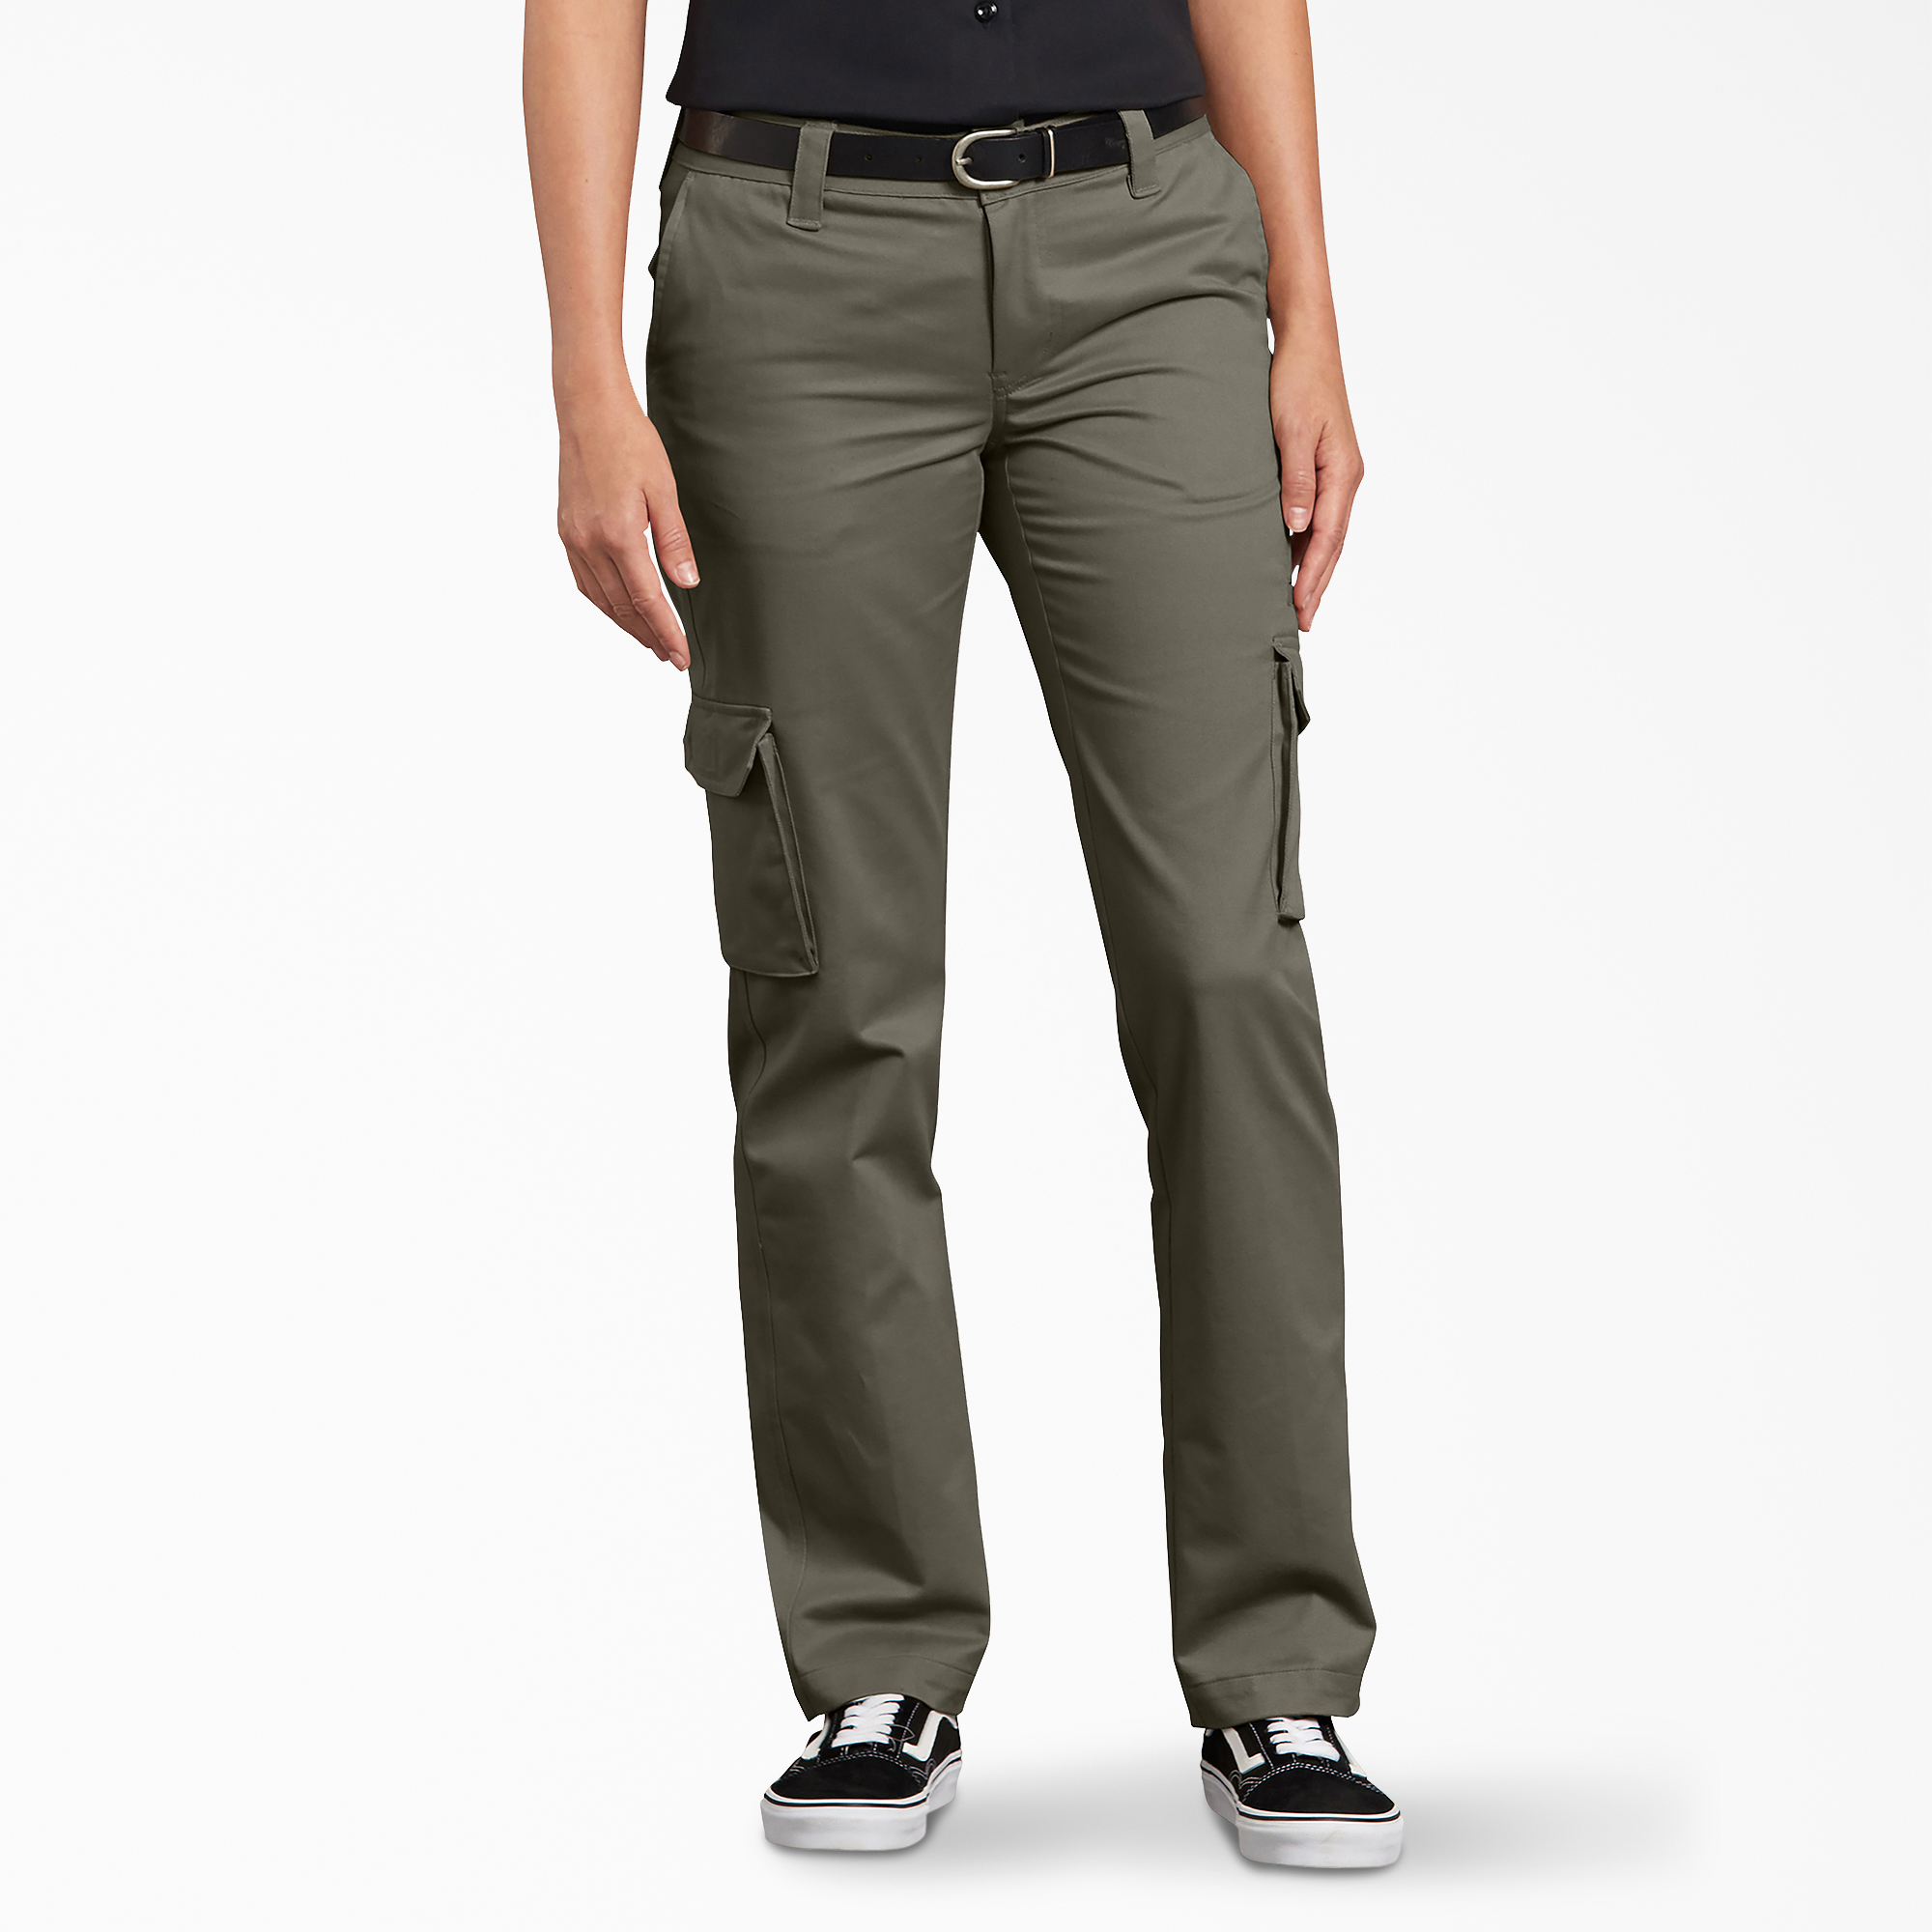 Women's Stretch Relaxed Cargo Pants - Grape Leaf (GE)